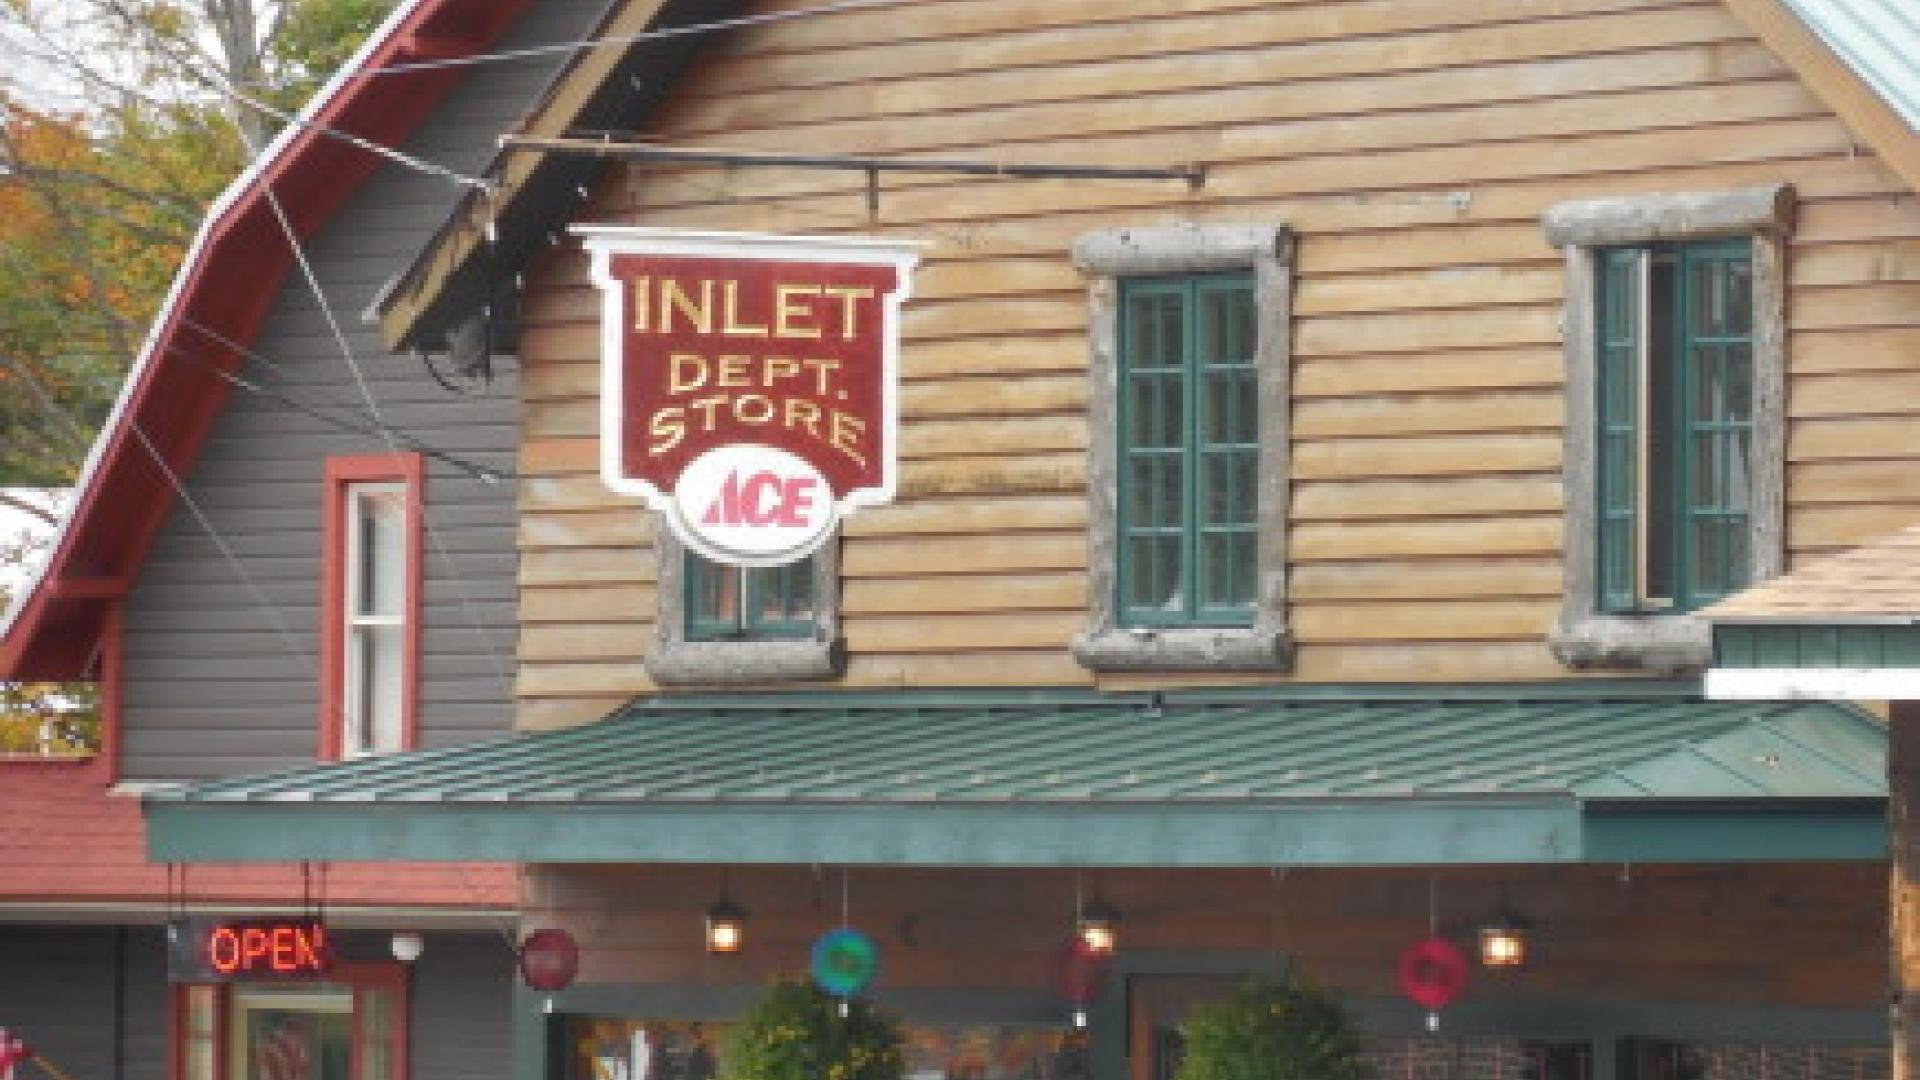 Inlet Department Store